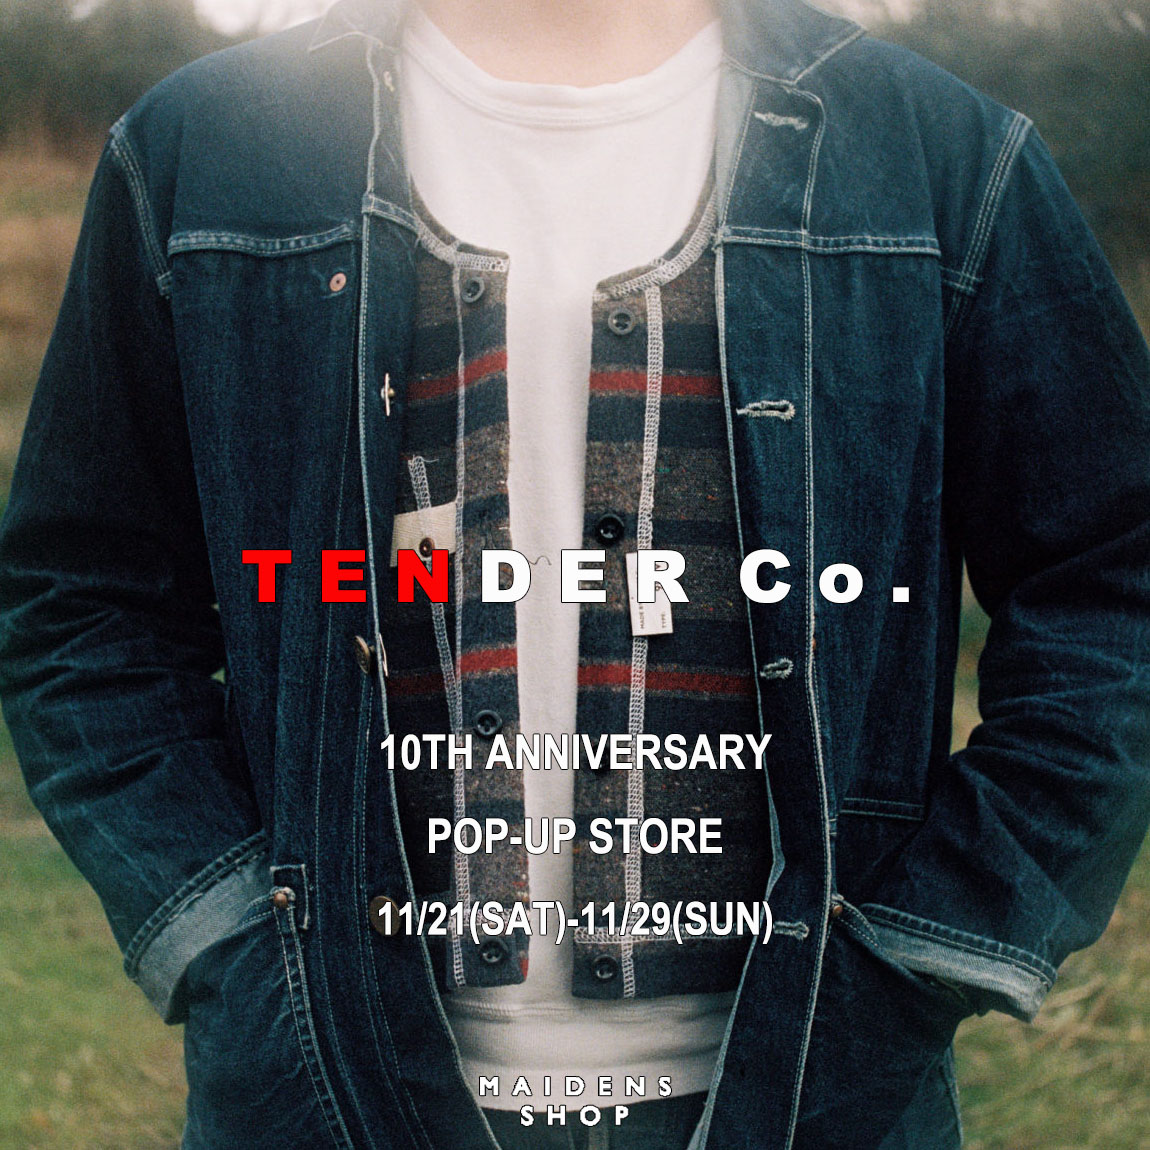 TENDER Co. “10TH ANNIVERSARY” TYPE 900 WOAD & TYPE 132 WOAD 